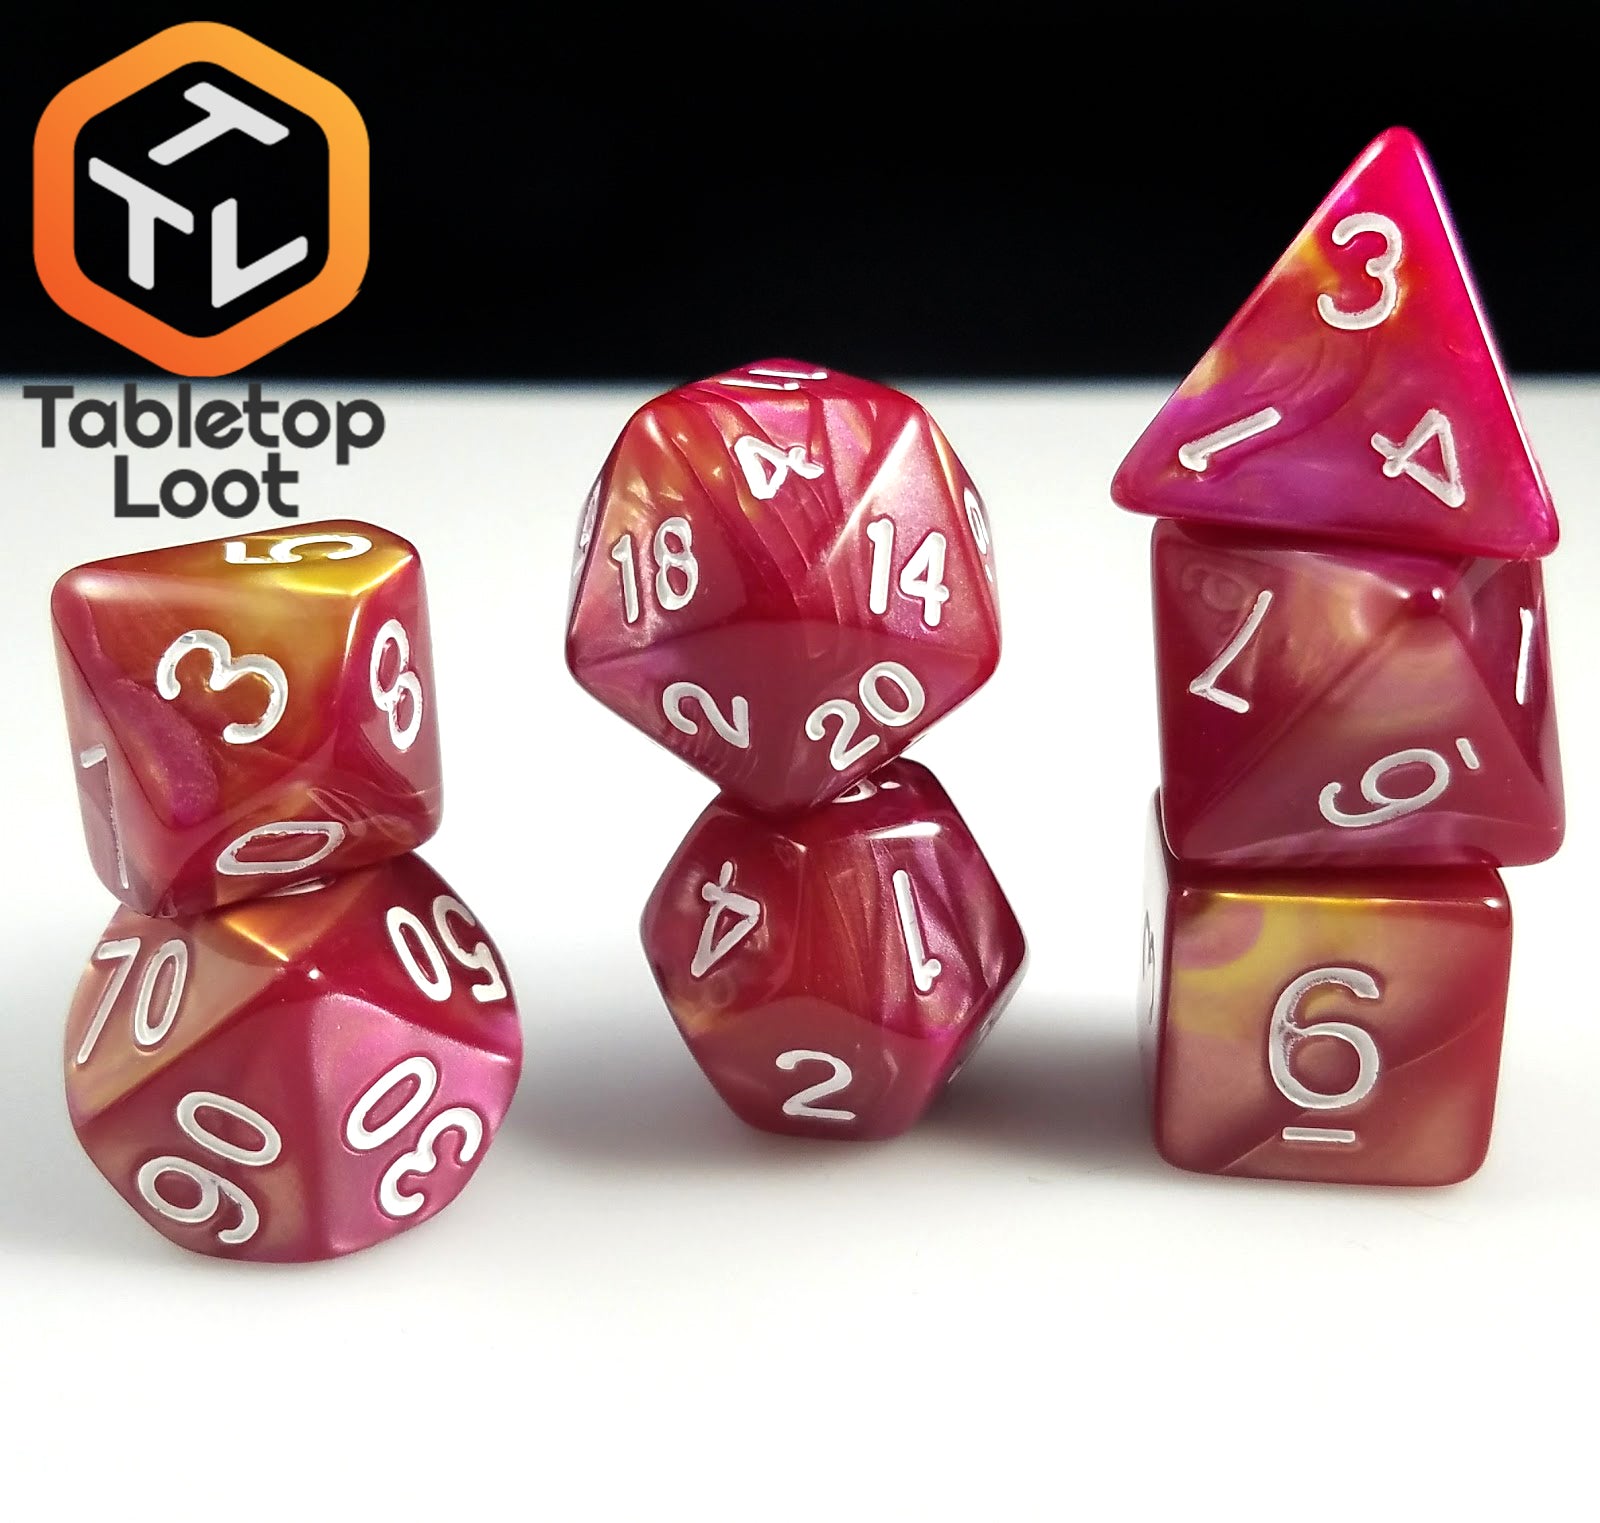 The Fire Opal 7 piece dice set from Tabletop Loot with swirls of pearlescent red and yellow and white numbering.'